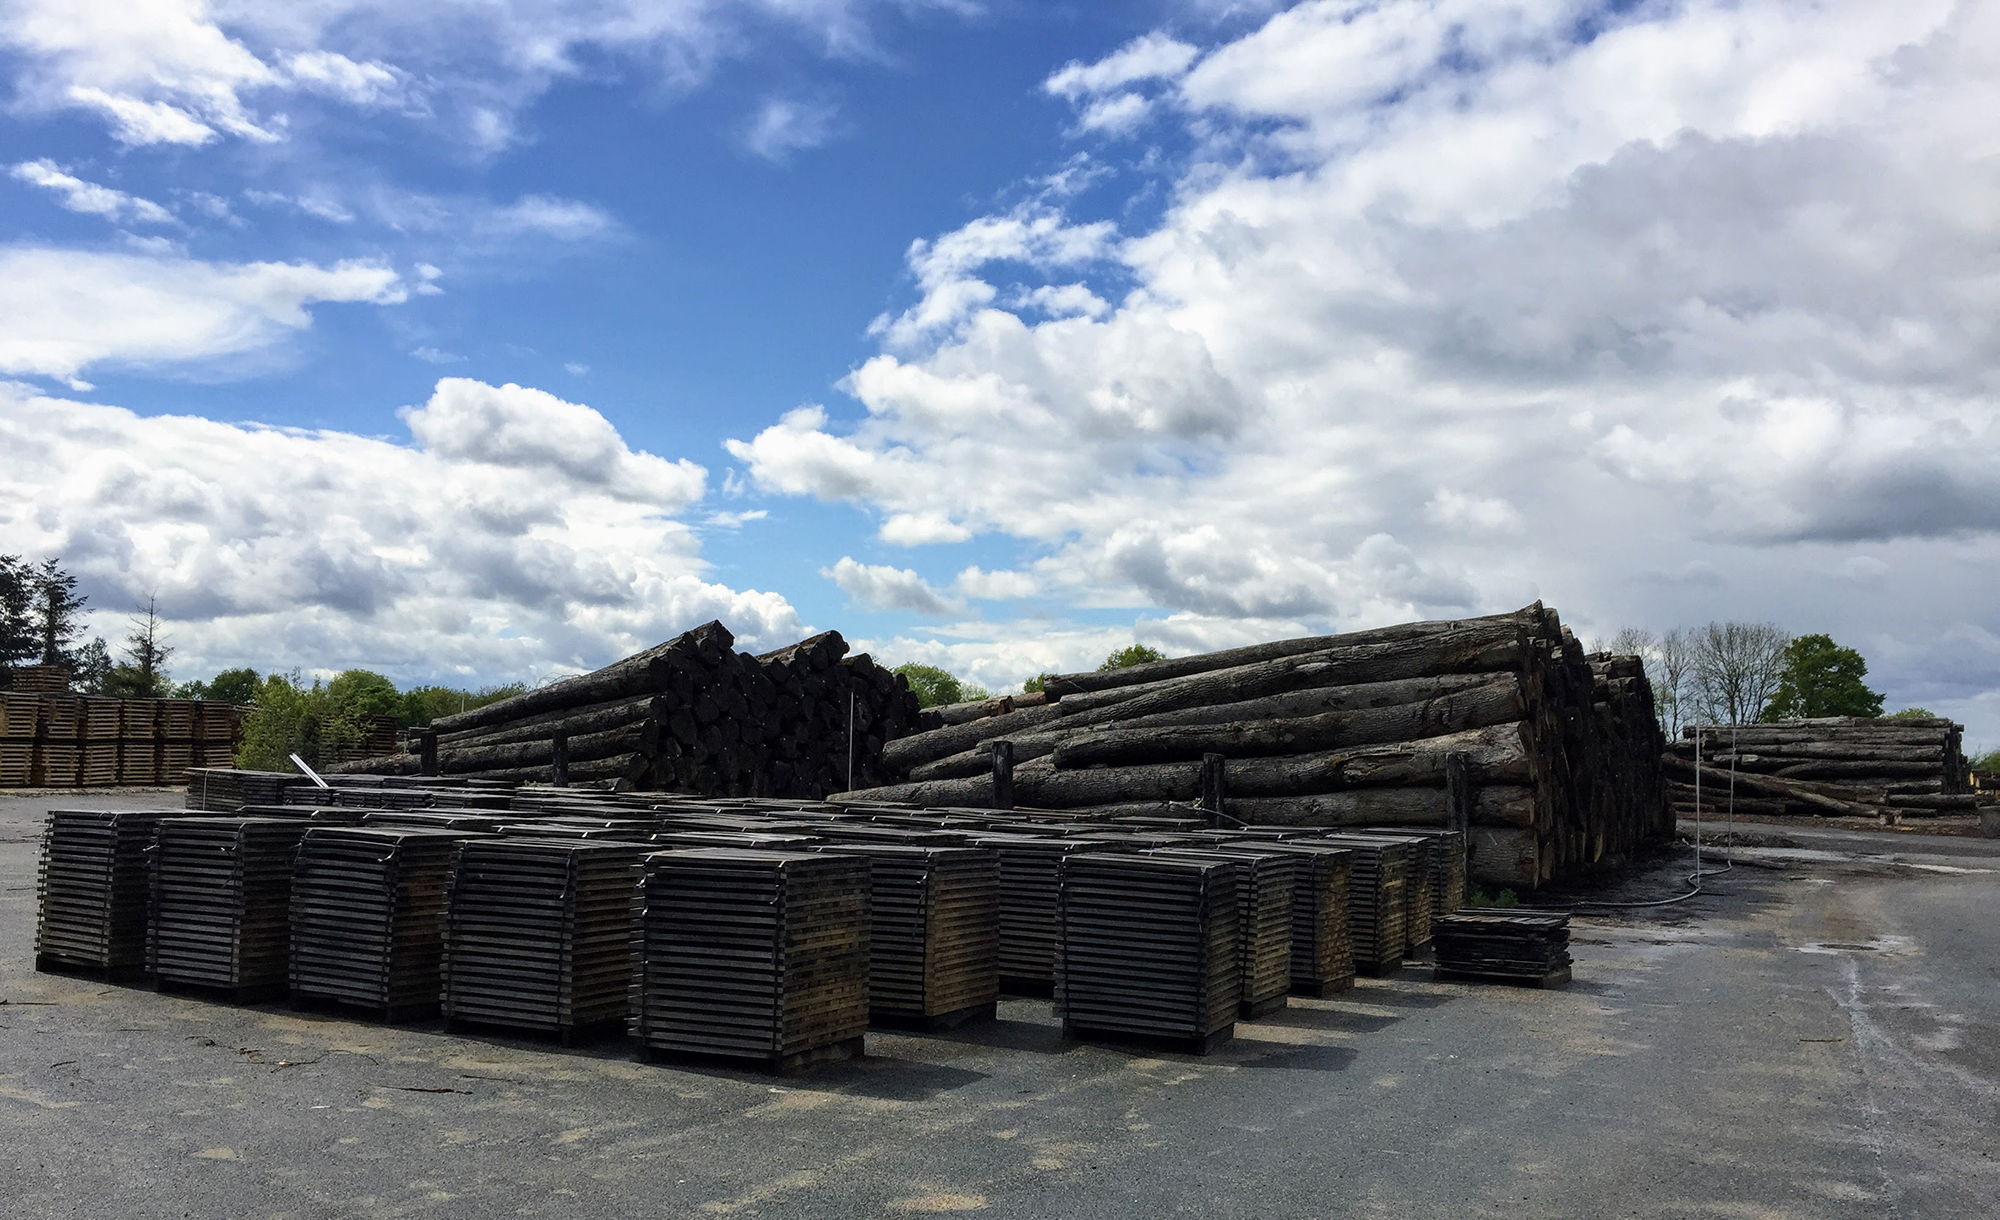 Rough oak barrel staves stacked in a mill yard on pallets next to a stack of oak logs.